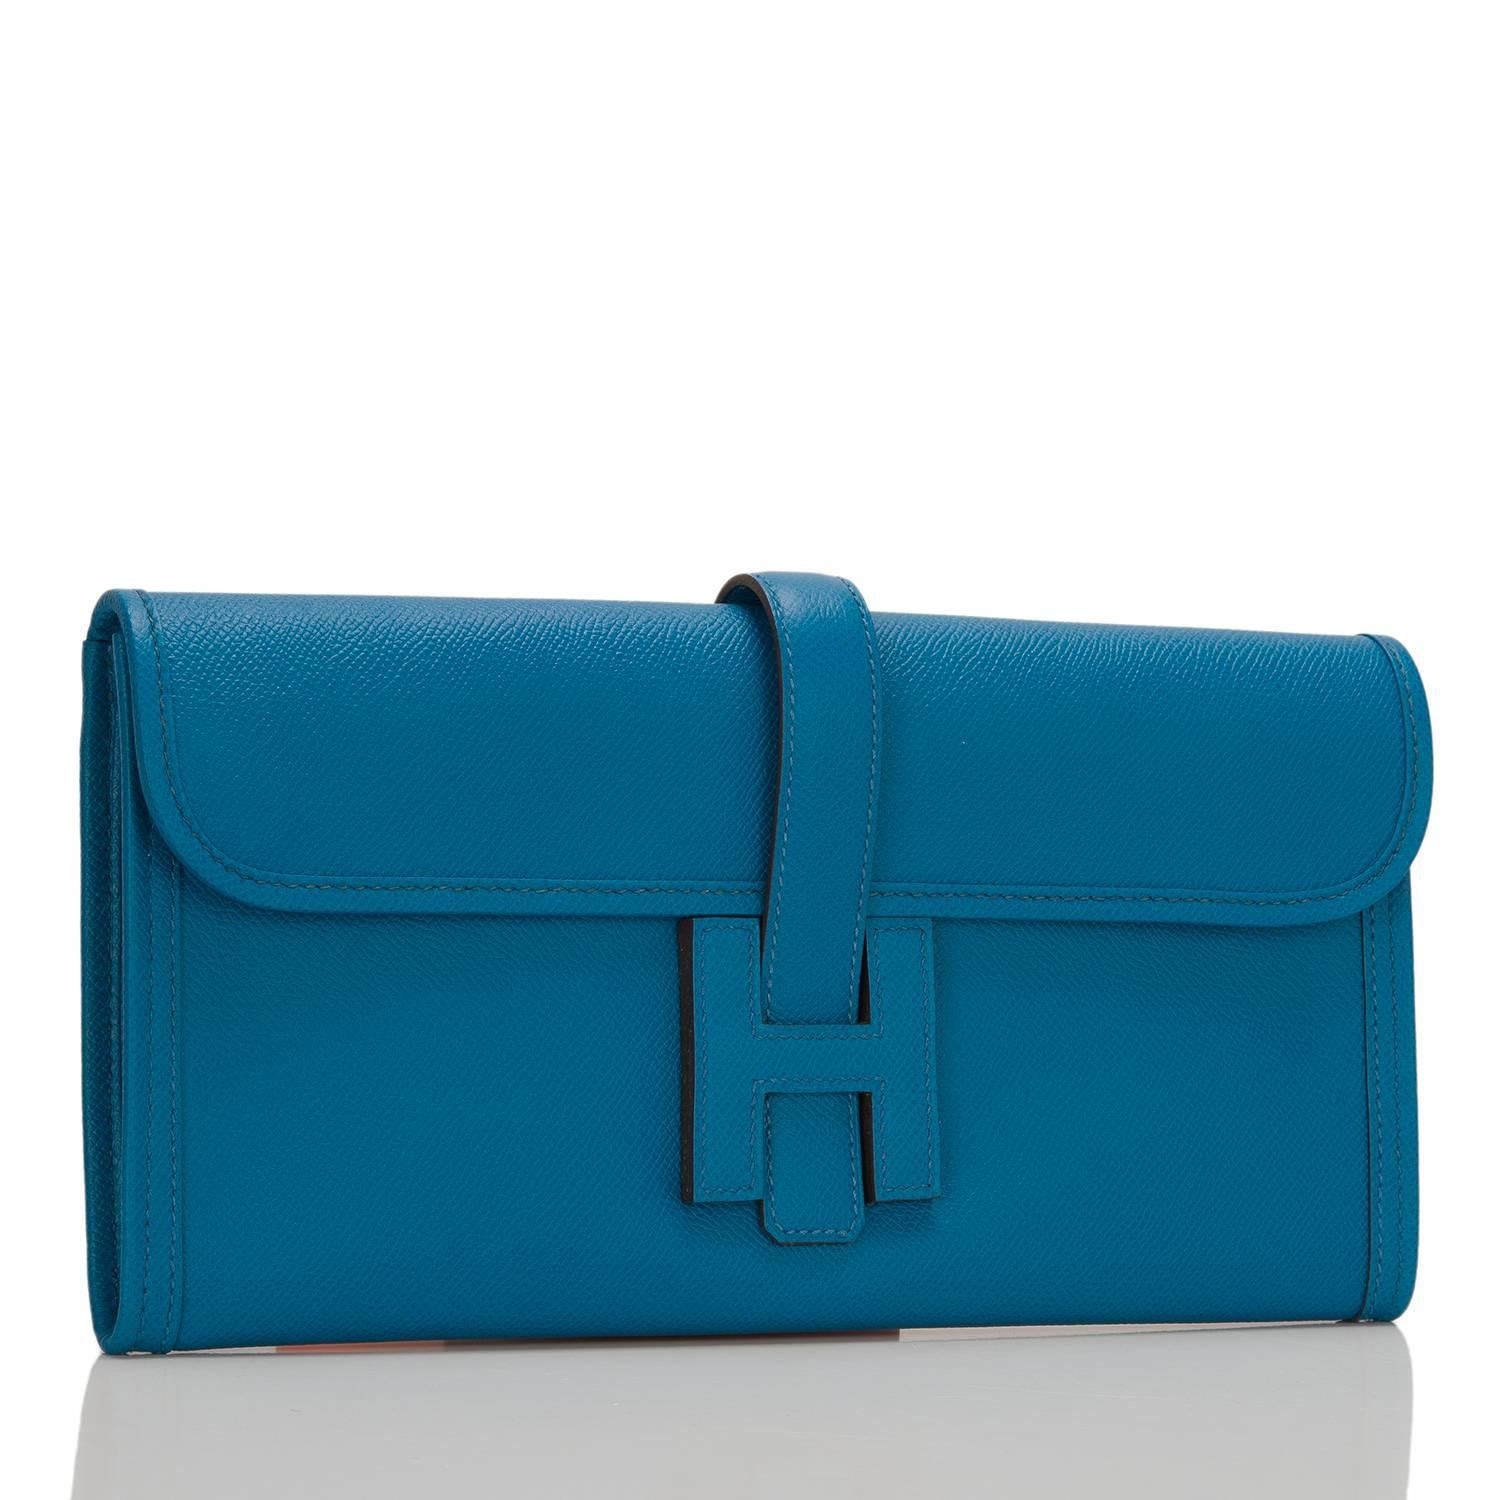 Hermes Blue Izmir epsom leather Jige Elan clutch 29cm

This style features tonal stitching and front 